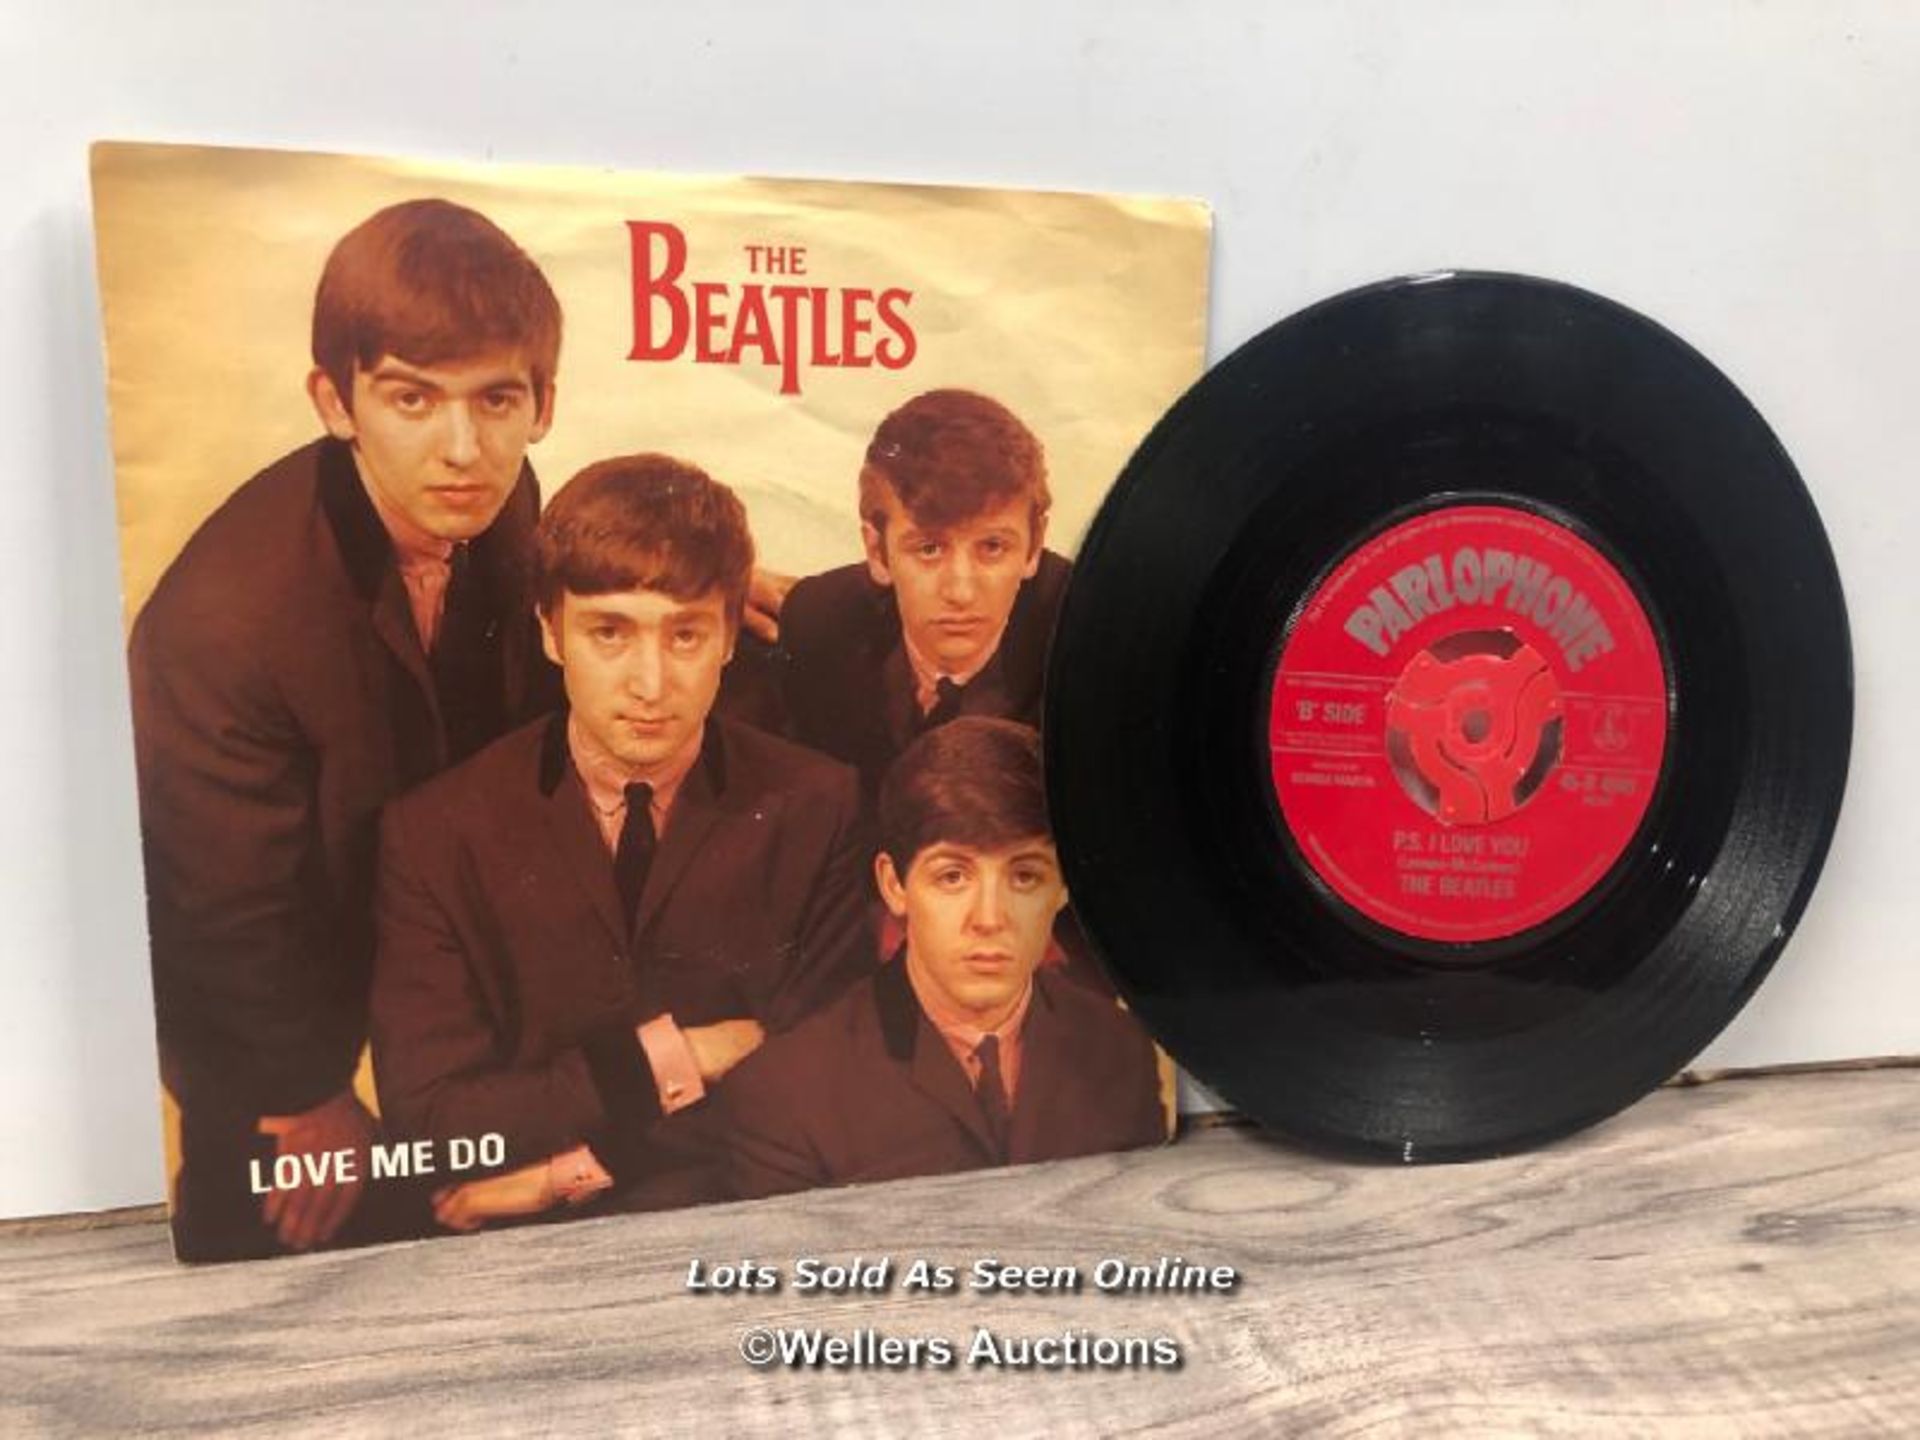 THE BEATLES - FIVE VINYL SINGLES INCLUDING 'LOVE ME DO' PARLOPHONE R 4949 1962, 'HEY JUDE' R5722, - Image 4 of 6